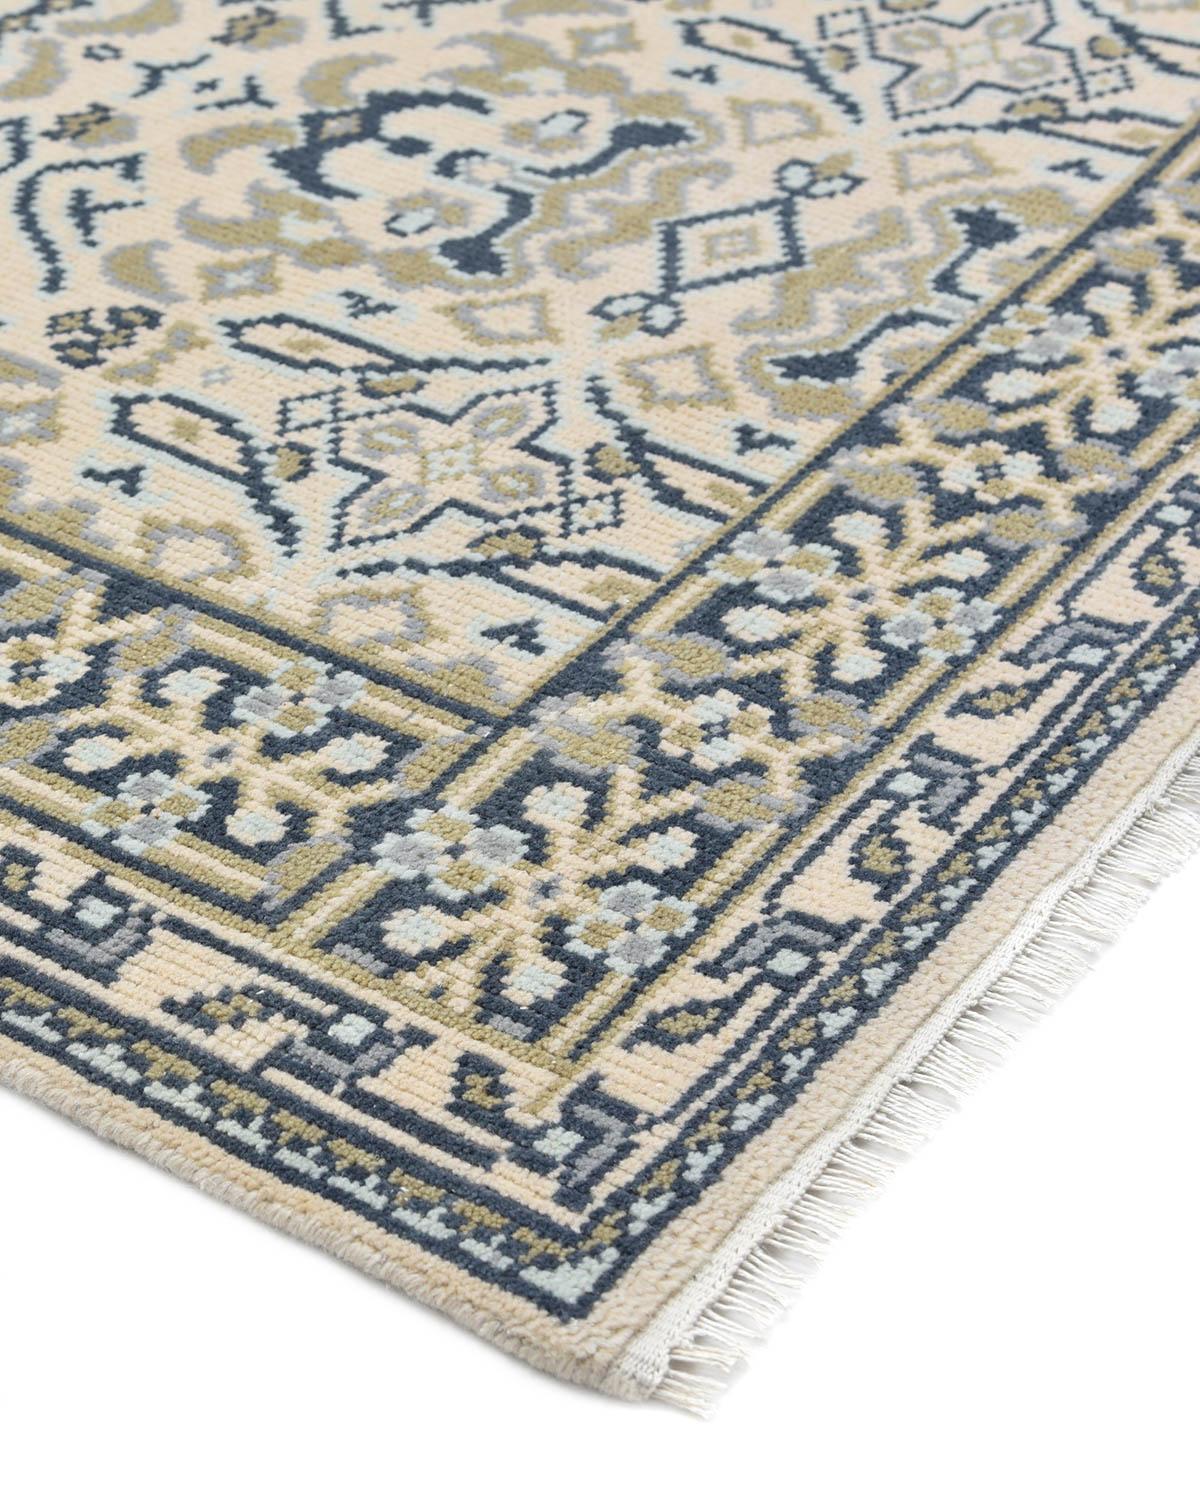 Patterned rugs are the easiest way to enrich a space. Subtle colors and intricate motifs reinforce the quiet sophistication of a traditional room; bolder hues and larger, looser patterns contribute to the vibrancy of an eclectic space. Each rug,